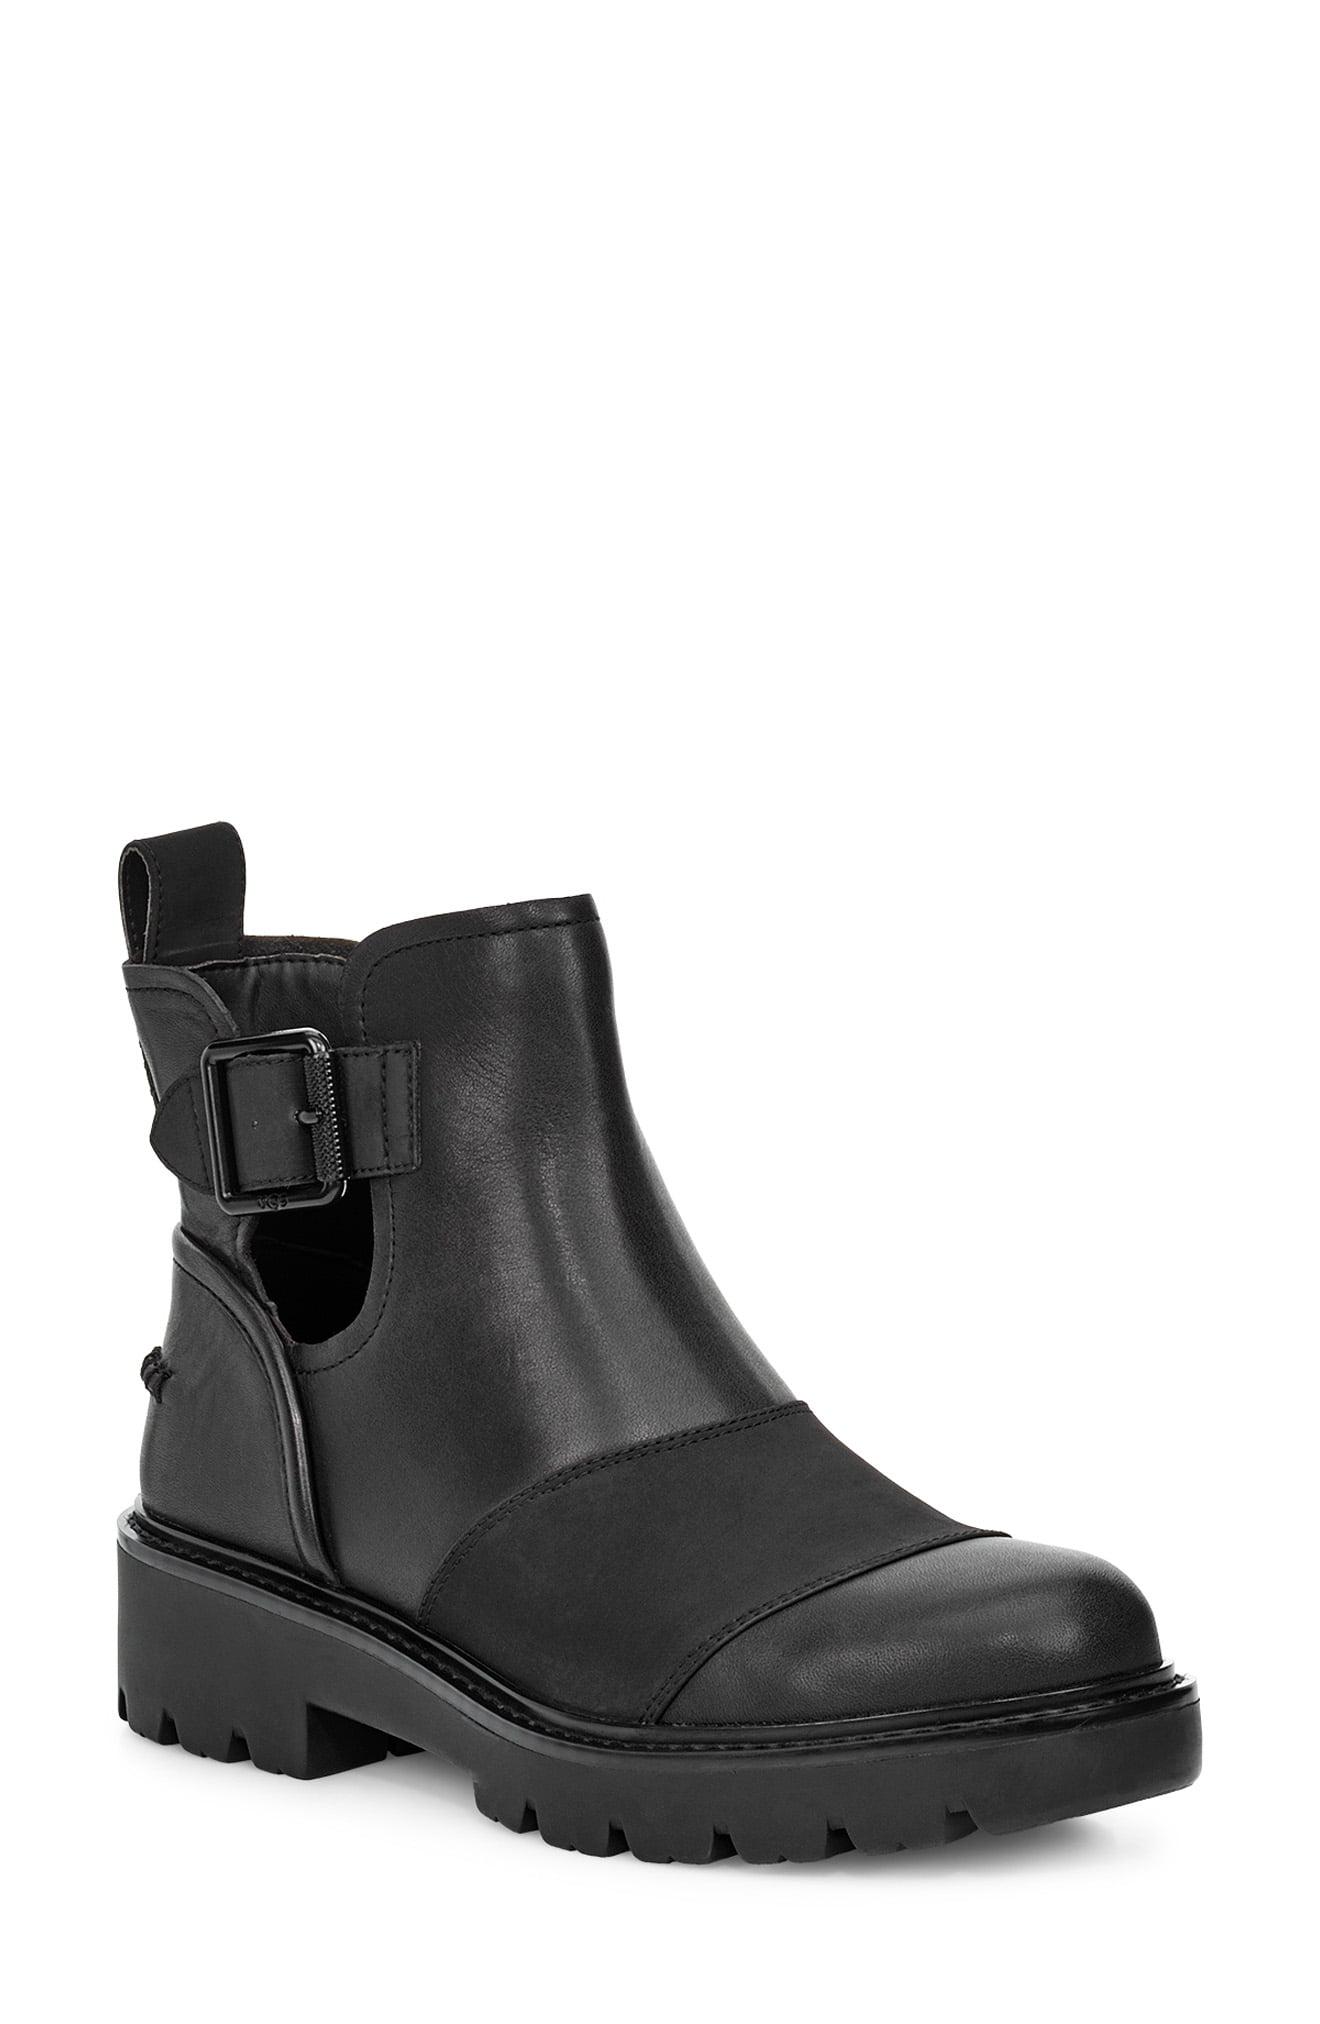 UGG Leather UGG Stockton Bootie in Black Leather (Black) - Lyst